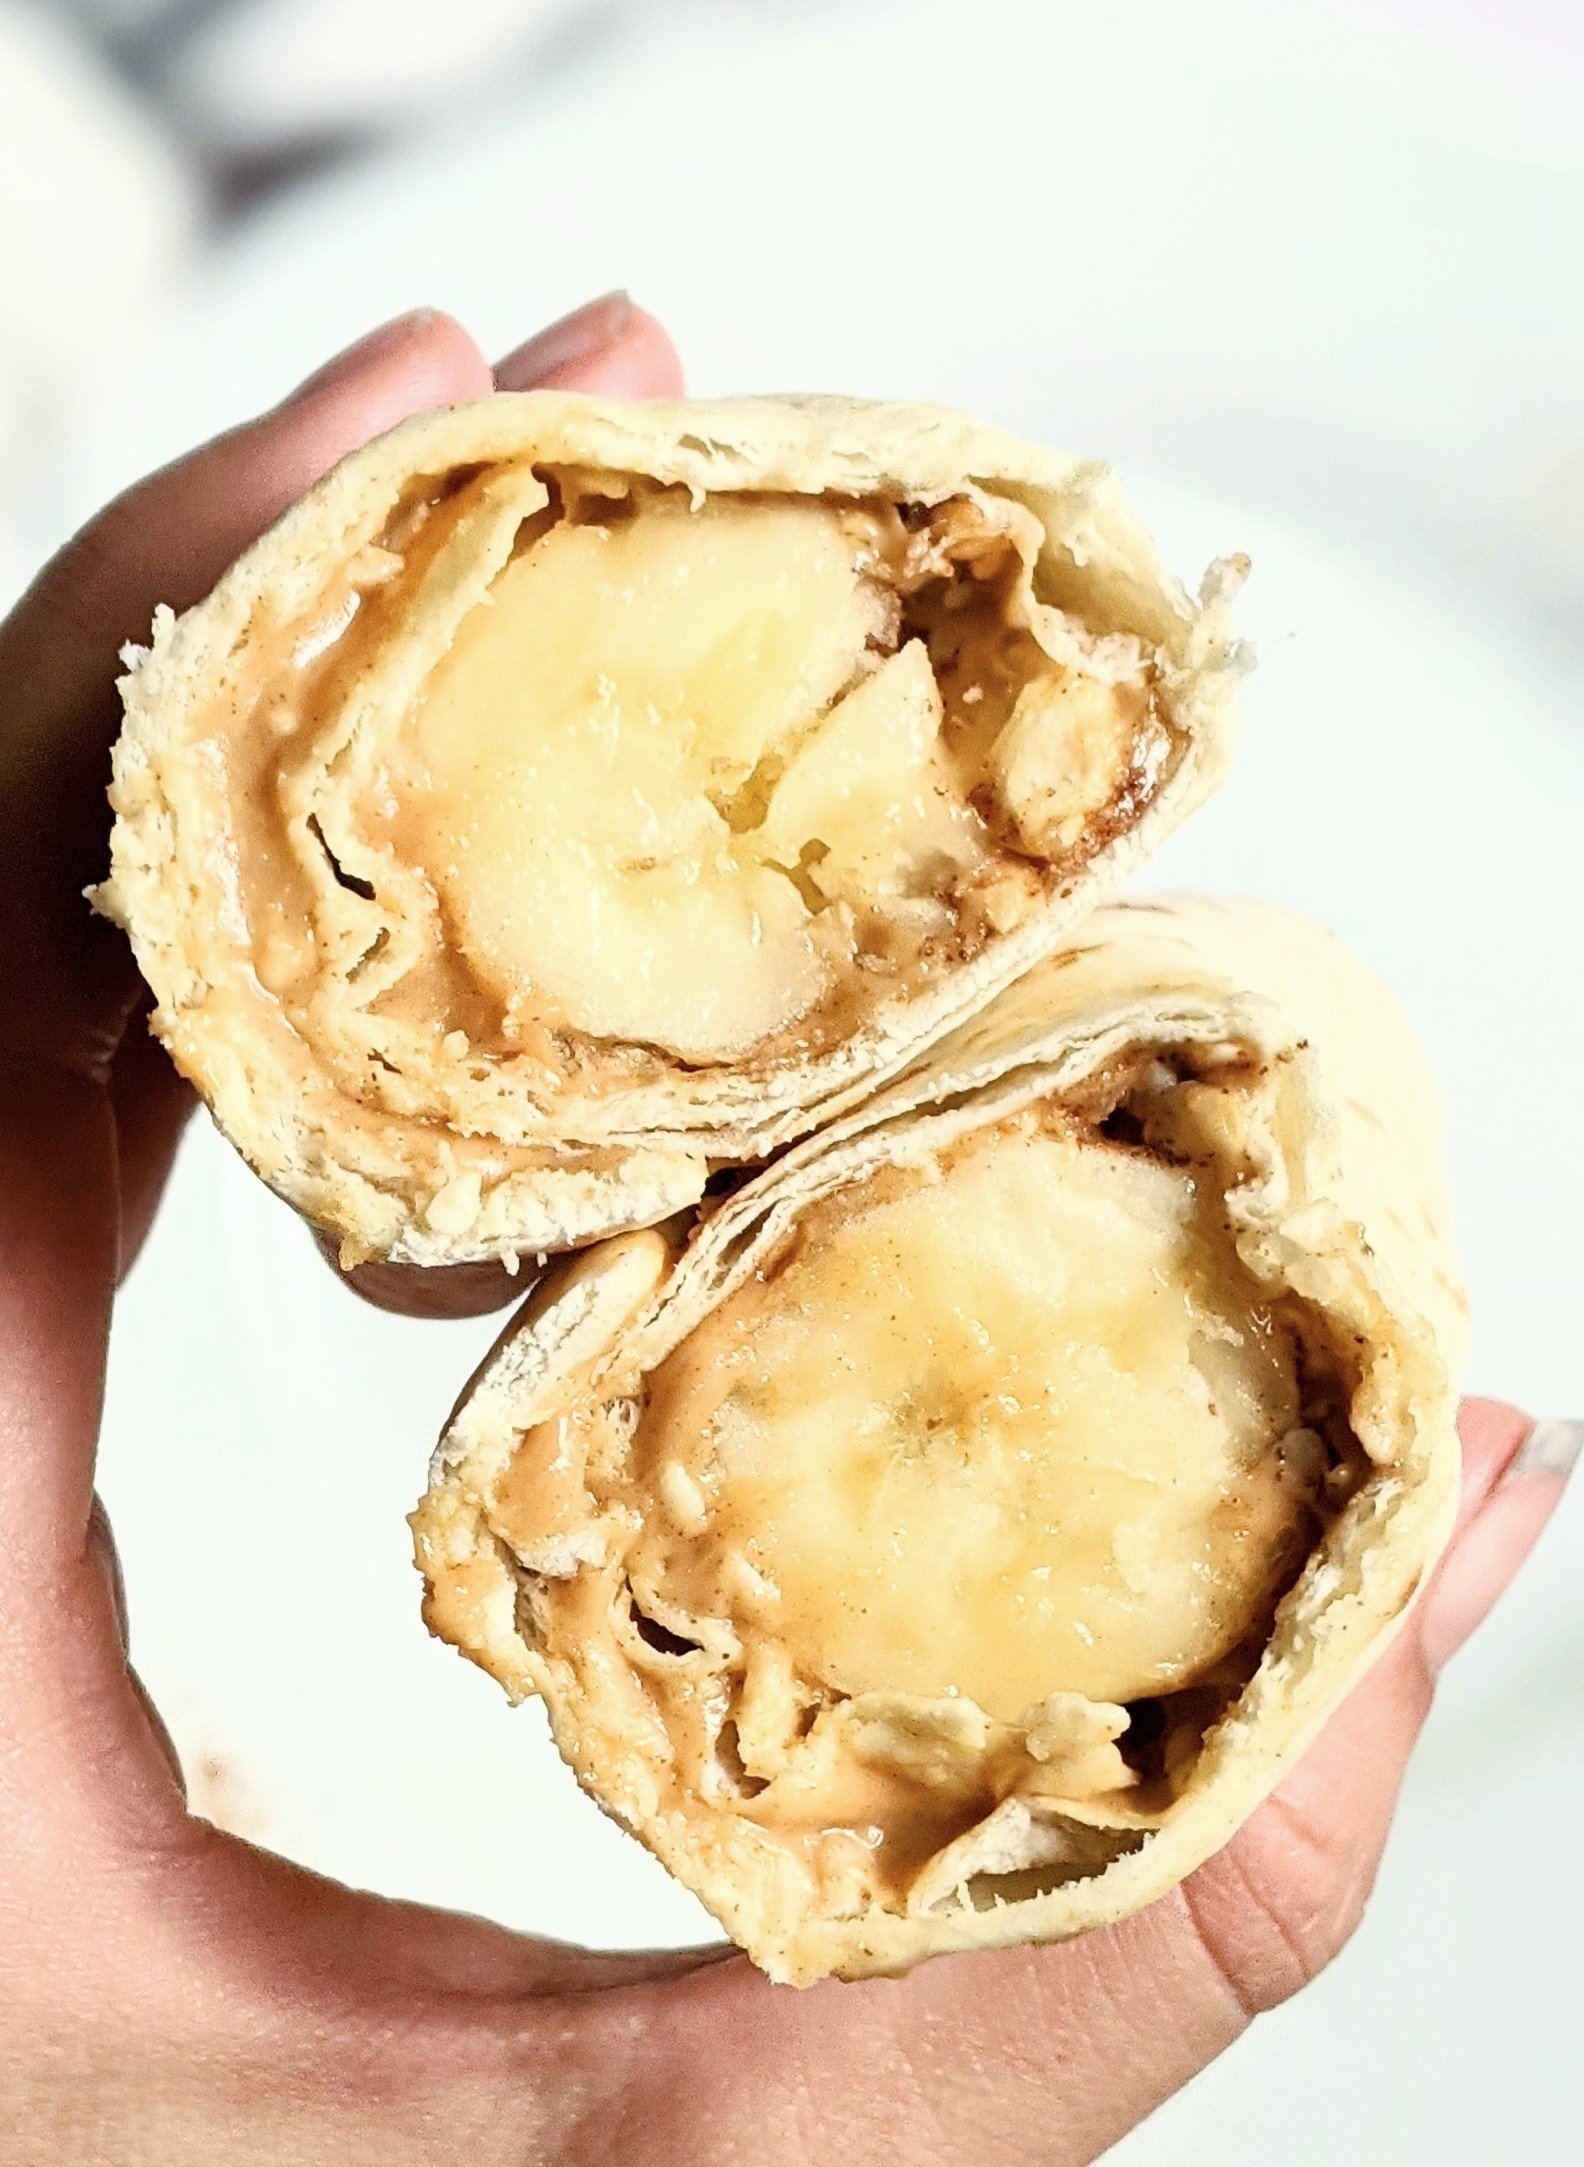 healthy wfh snacks work from home snack homeschool snacks kids can make high protein dairy free wrap ideas non dairy wraps with banana peanut butter and tortilla